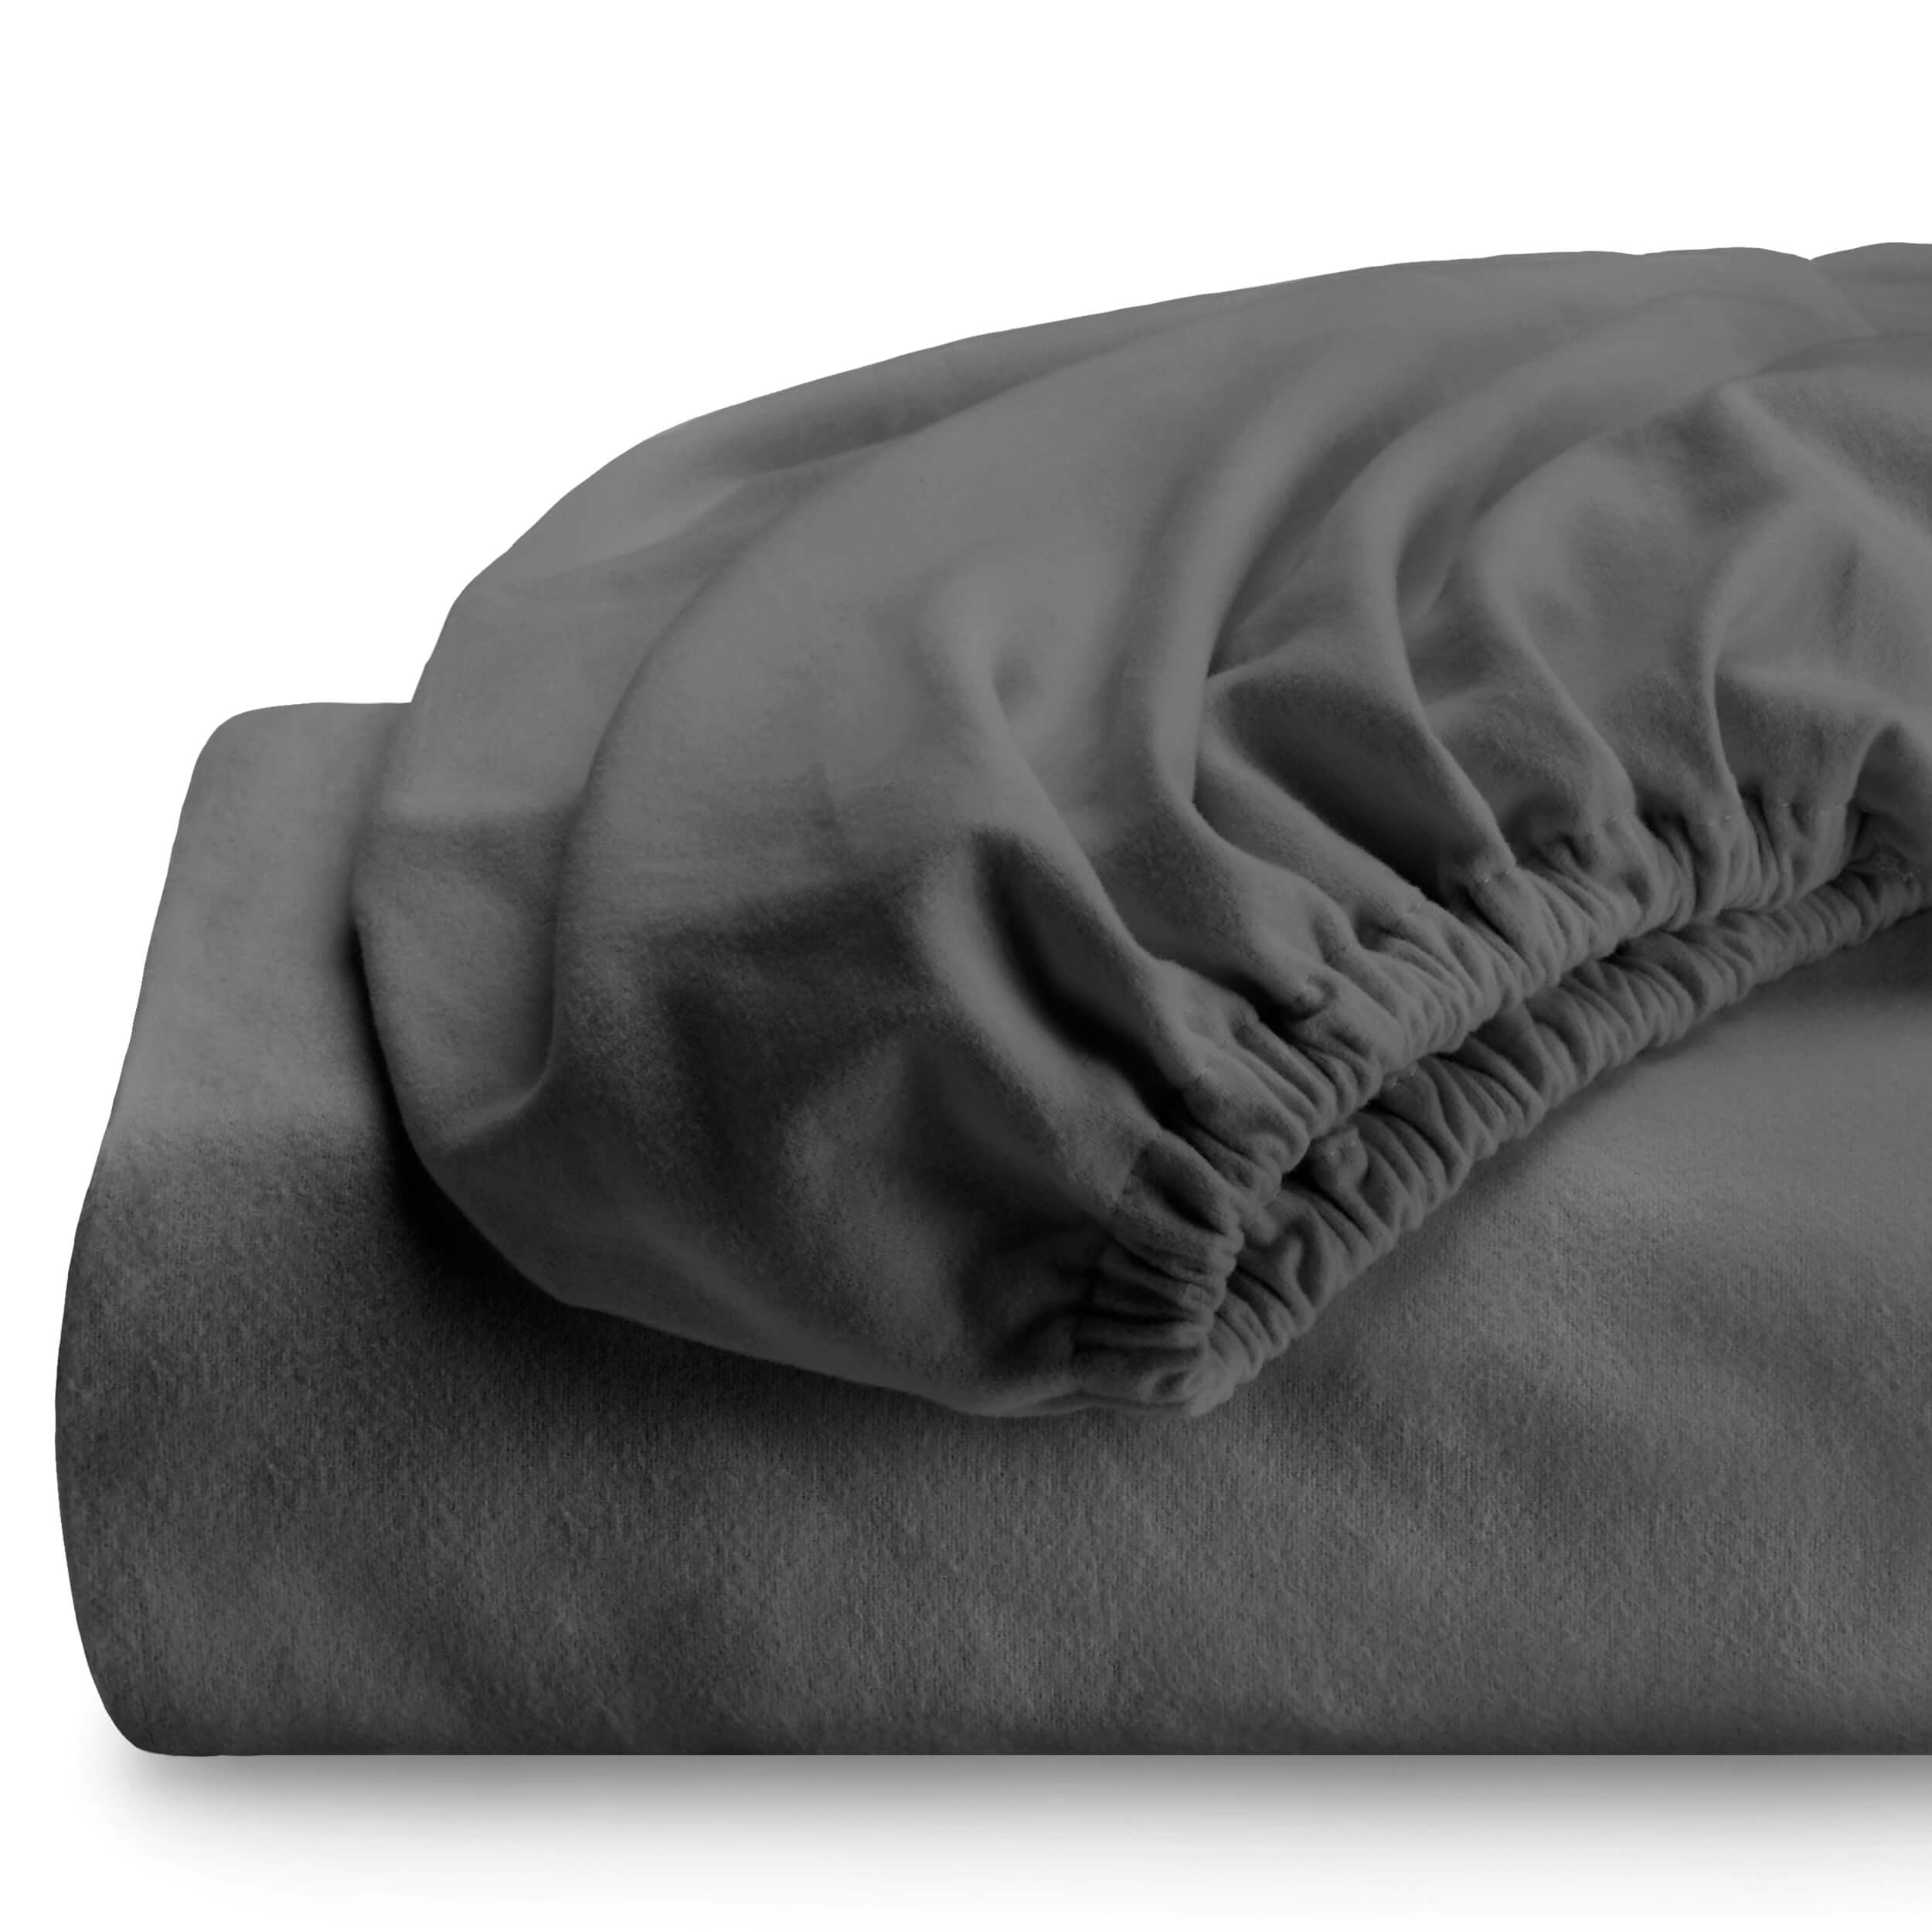 Details about   Bare Home Fitted Bottom Sheet Premium 1800 Ultra-Soft Wrinkle Resistant Microf